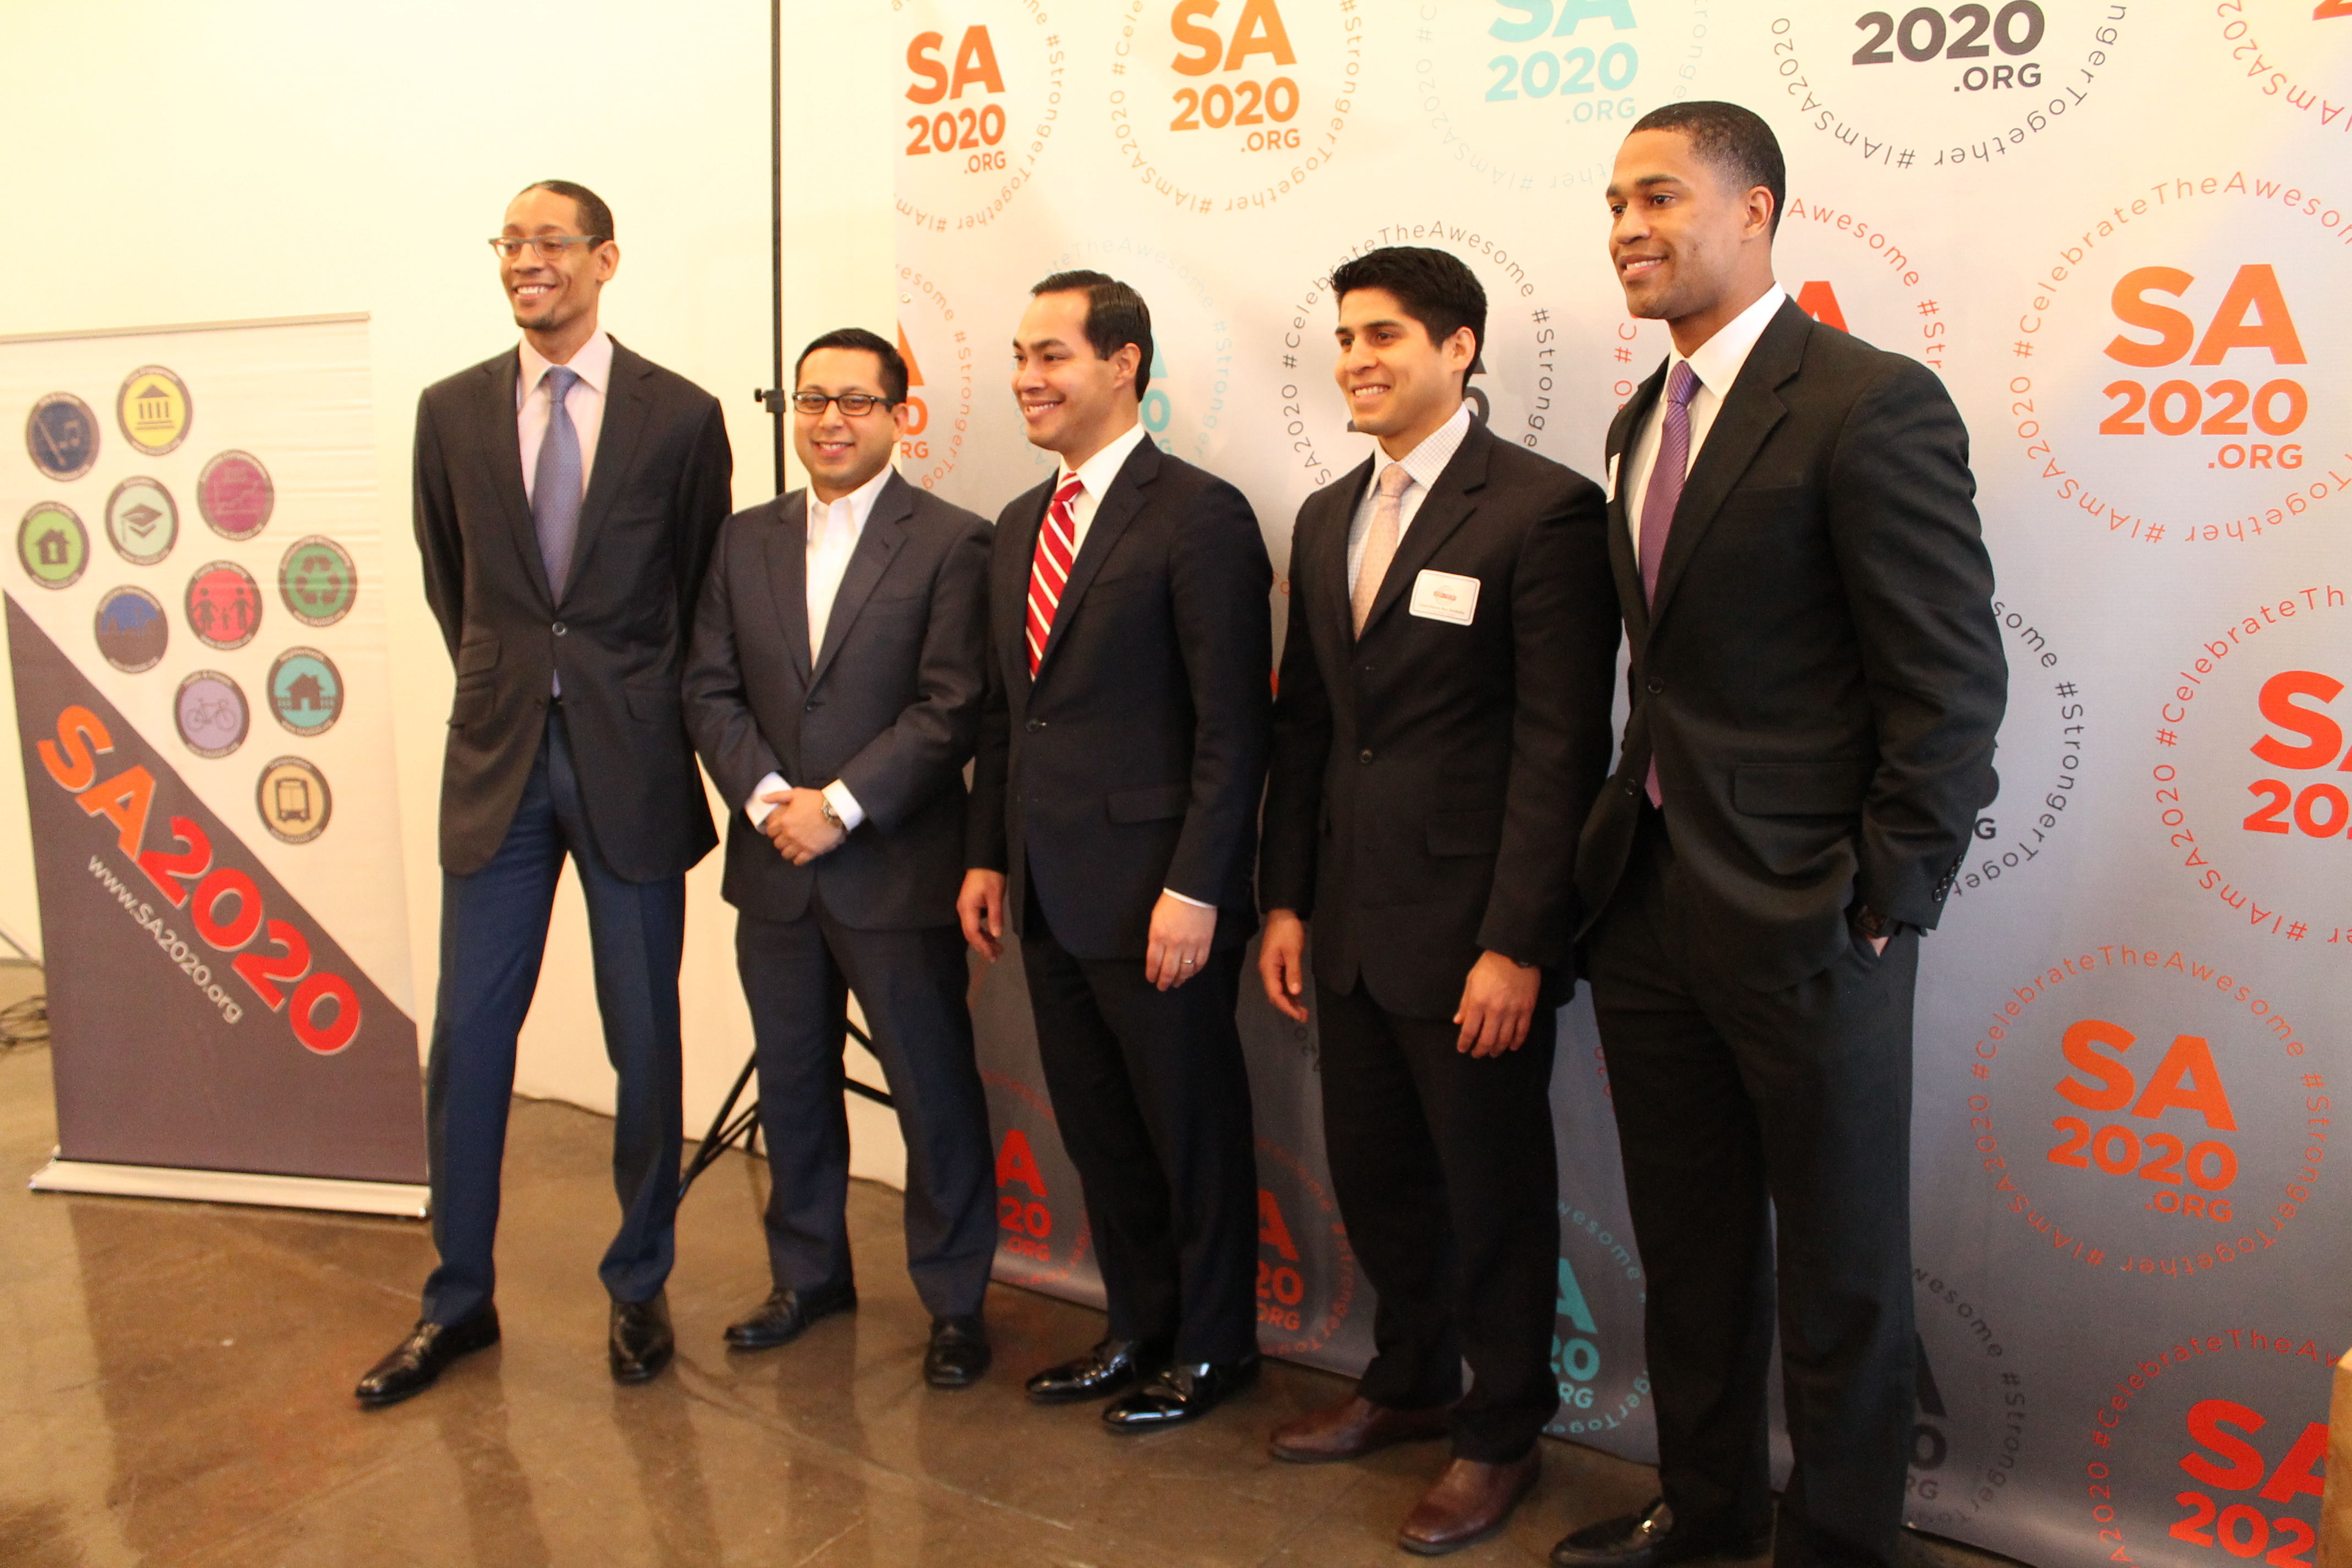 Brandon Logan (right) at the SA2020 Resolutions Press Conference with SA2020 President and CEO Darryl Byrd, as well as fellow Resolutions Leaders (from left): District 1 City Council Representative Diego Bernal, Mayor Julián Castro, and District 4 City Council Rep. Ray Saldaña.